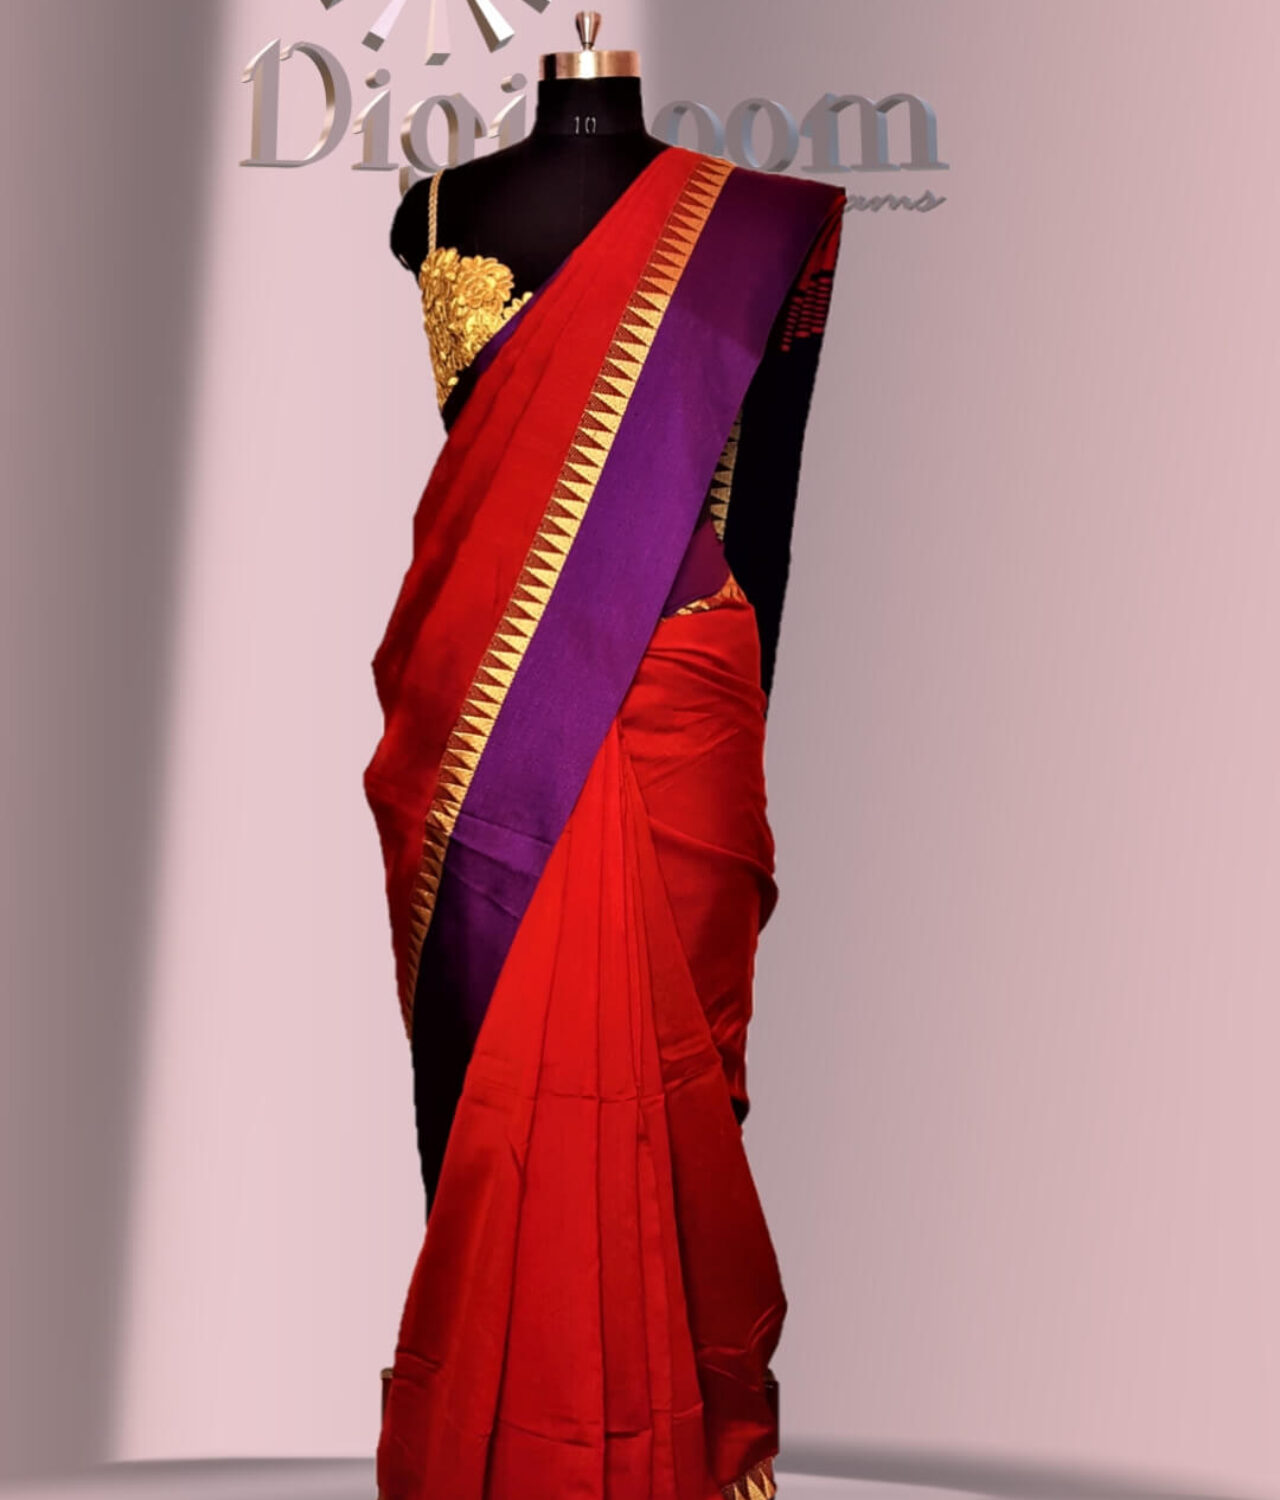 Bengal Handloom Cotton Silk Saree in deep red colour with a contrast Pallu